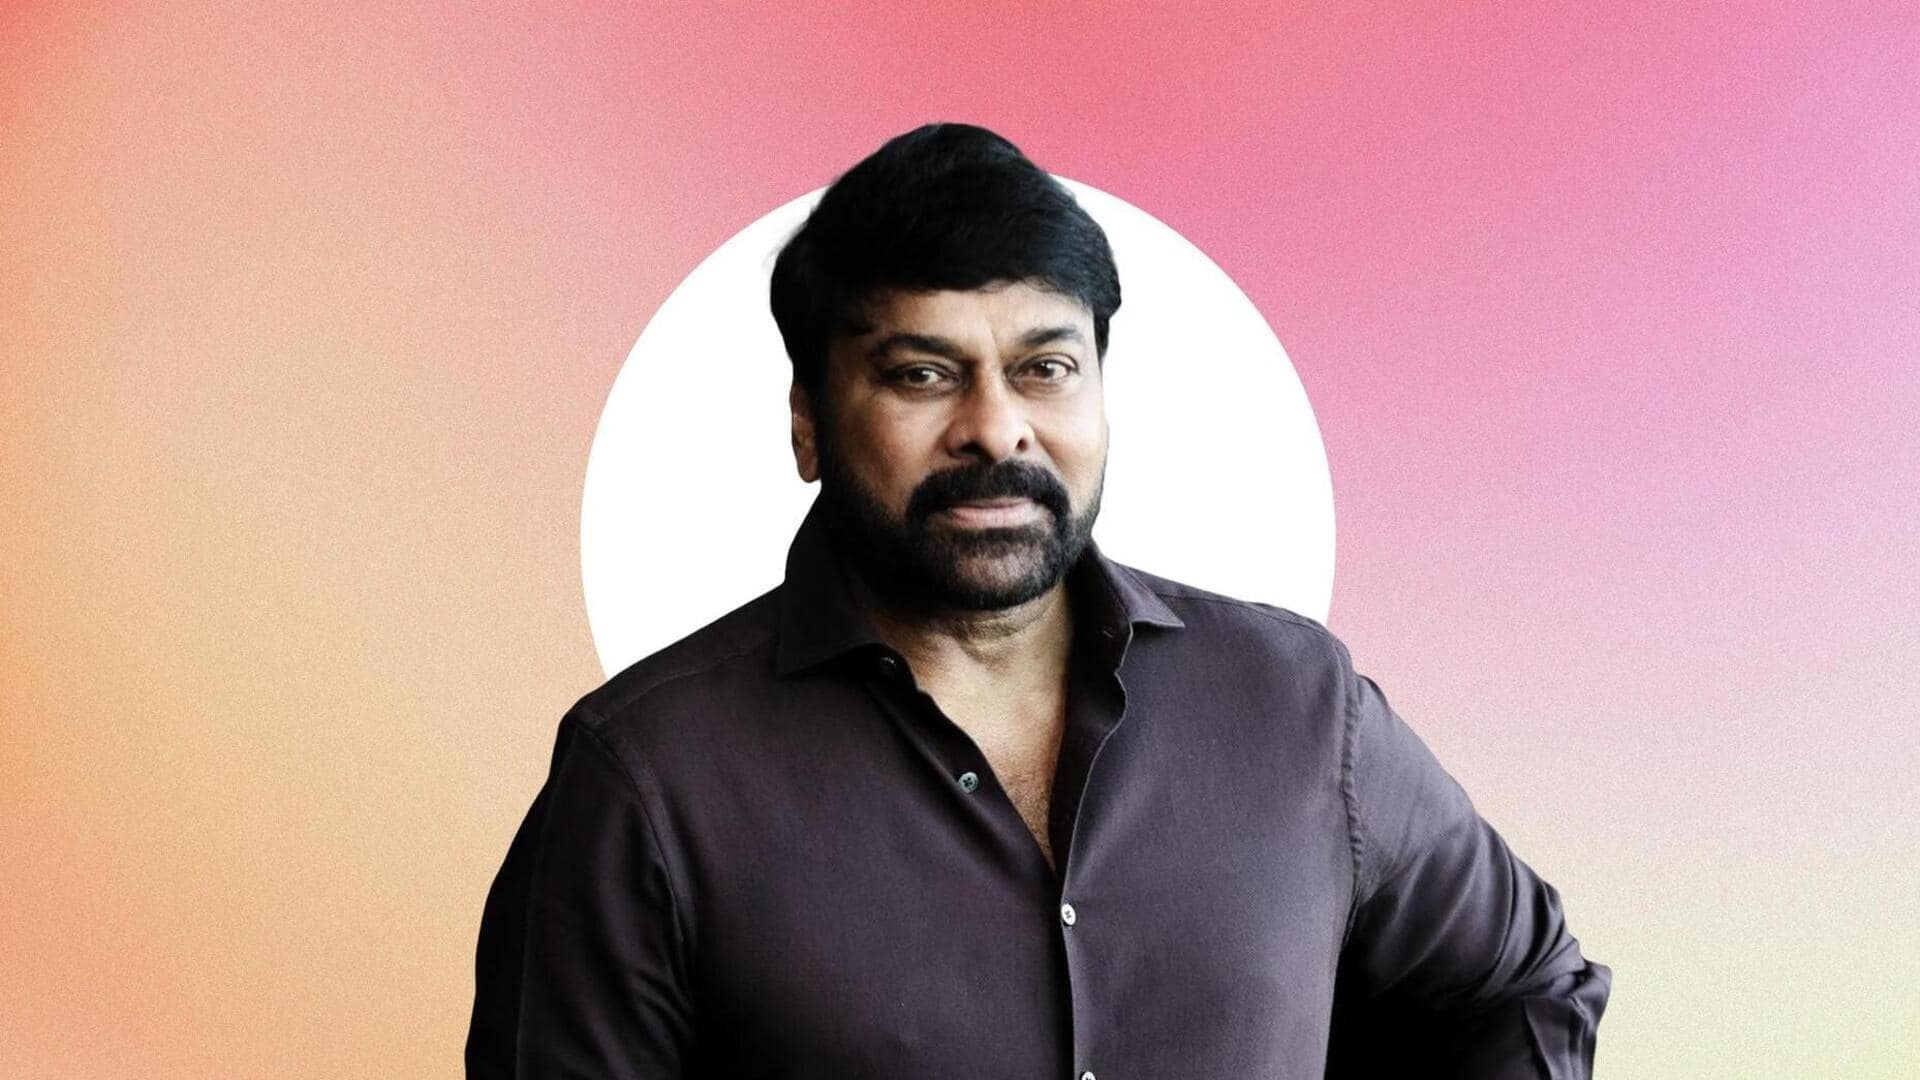 'The Family Man' was first offered to Chiranjeevi